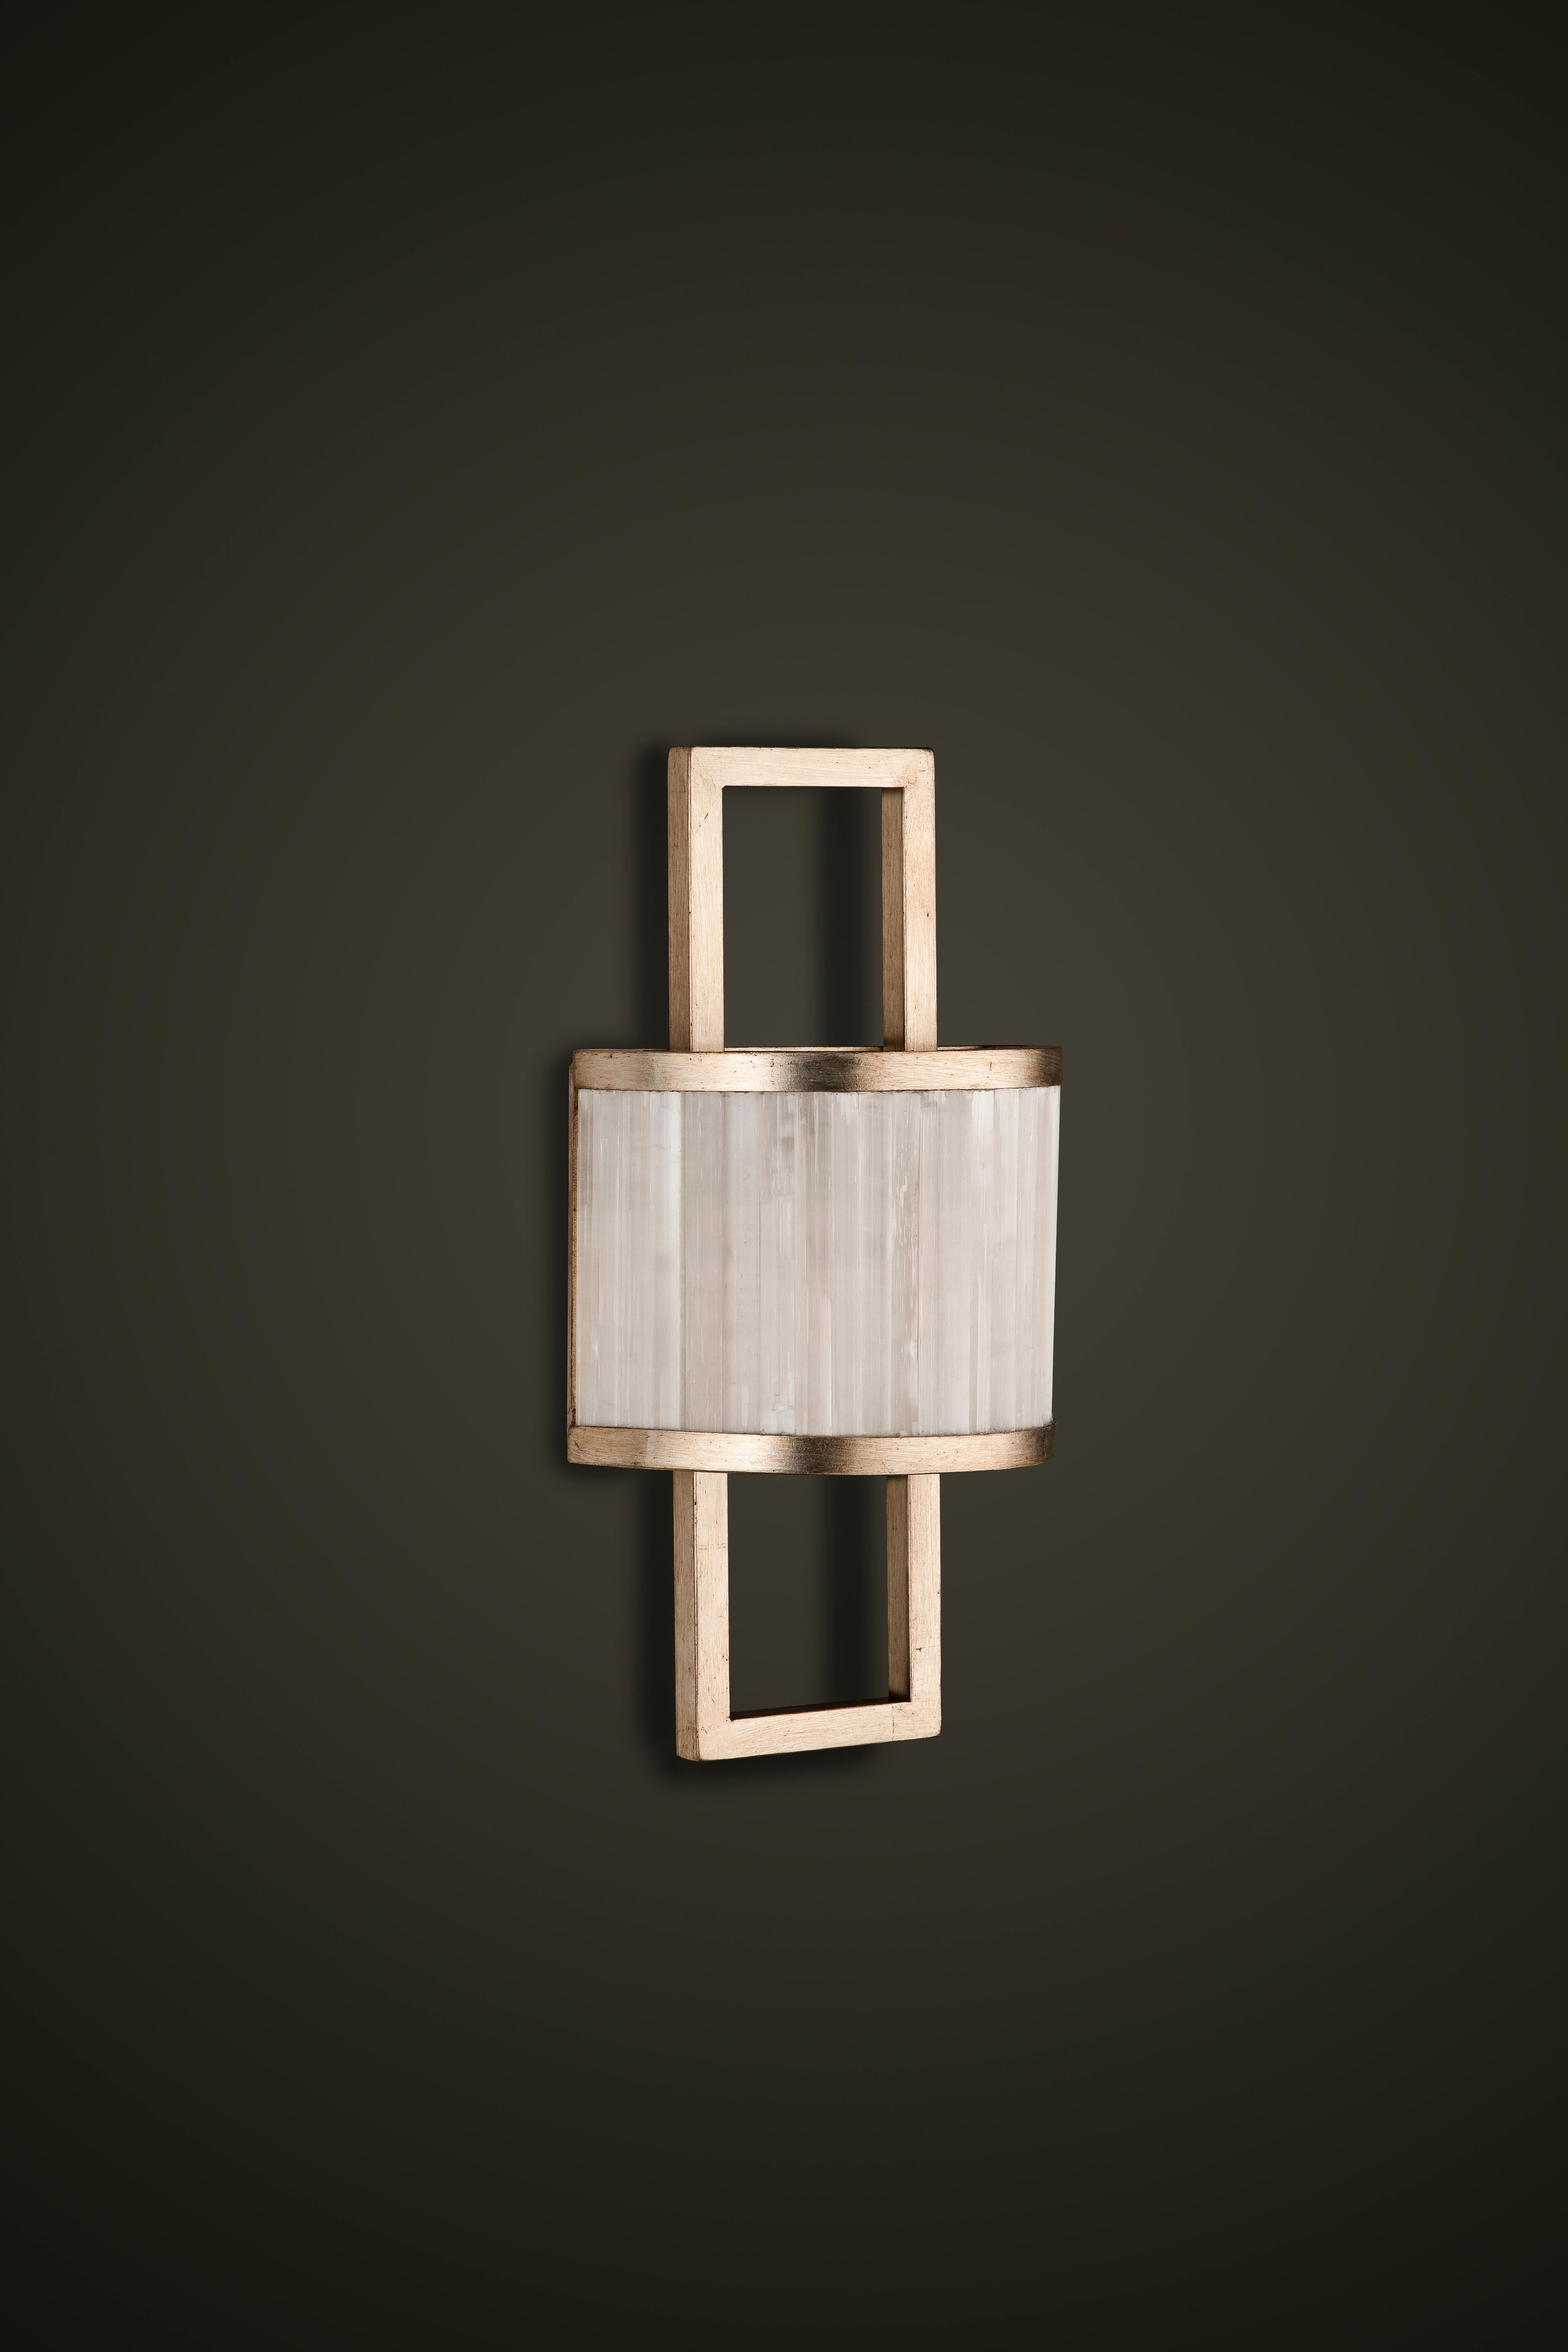 Selenite wall sconce by Aver
Dimensions: D 16 x W 26 x H 59 cm
Materials: Selenite, metal.
Also Available: silver leaf, antique silver leaf, gold leaf, brass leaf, copper leaf, pink gold leaf.

Cylindrical wall sconce with a beautiful manual